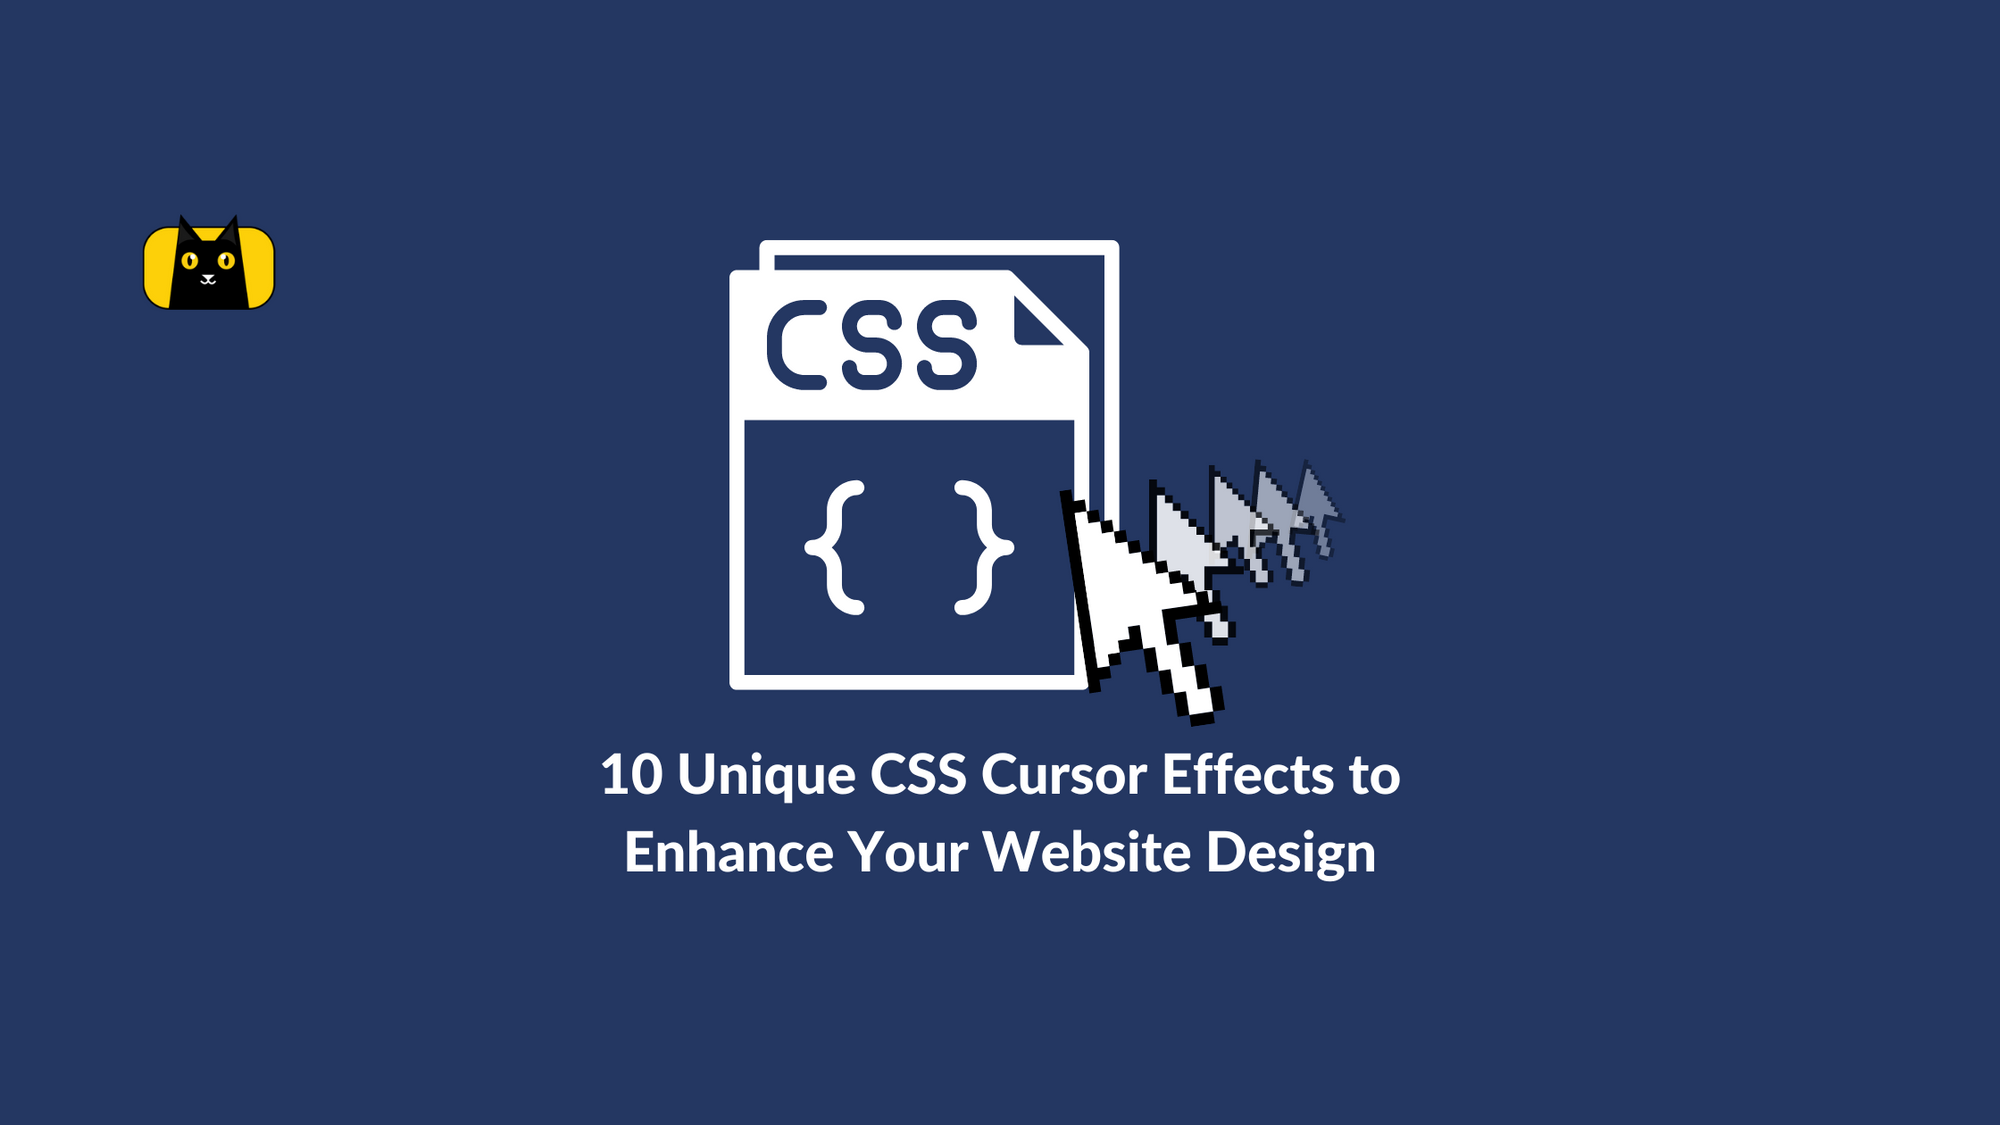 36 Cursors in CSS - The Complete Guide